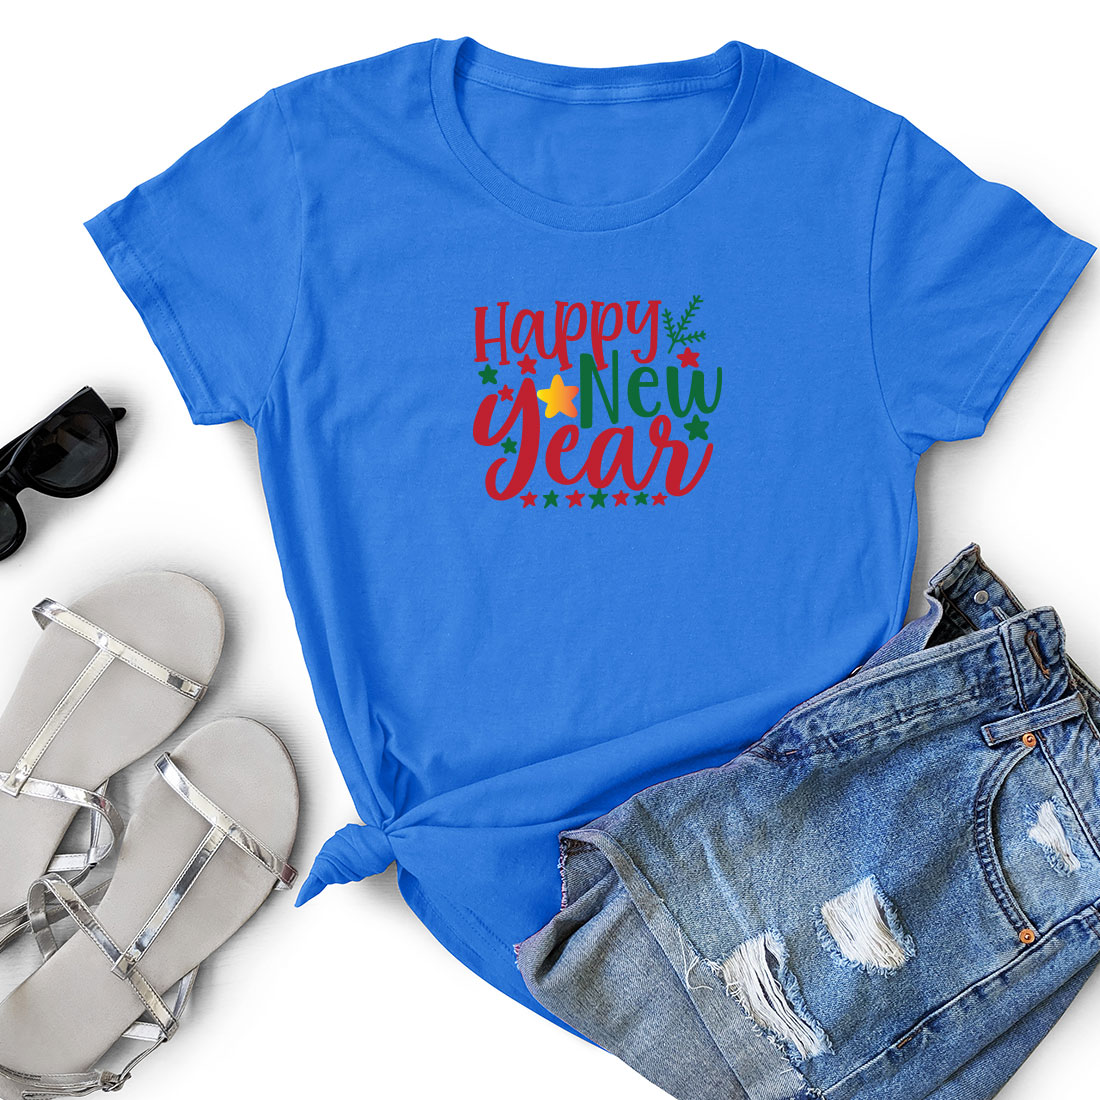 T - shirt that says happy new year next to a pair of shorts.